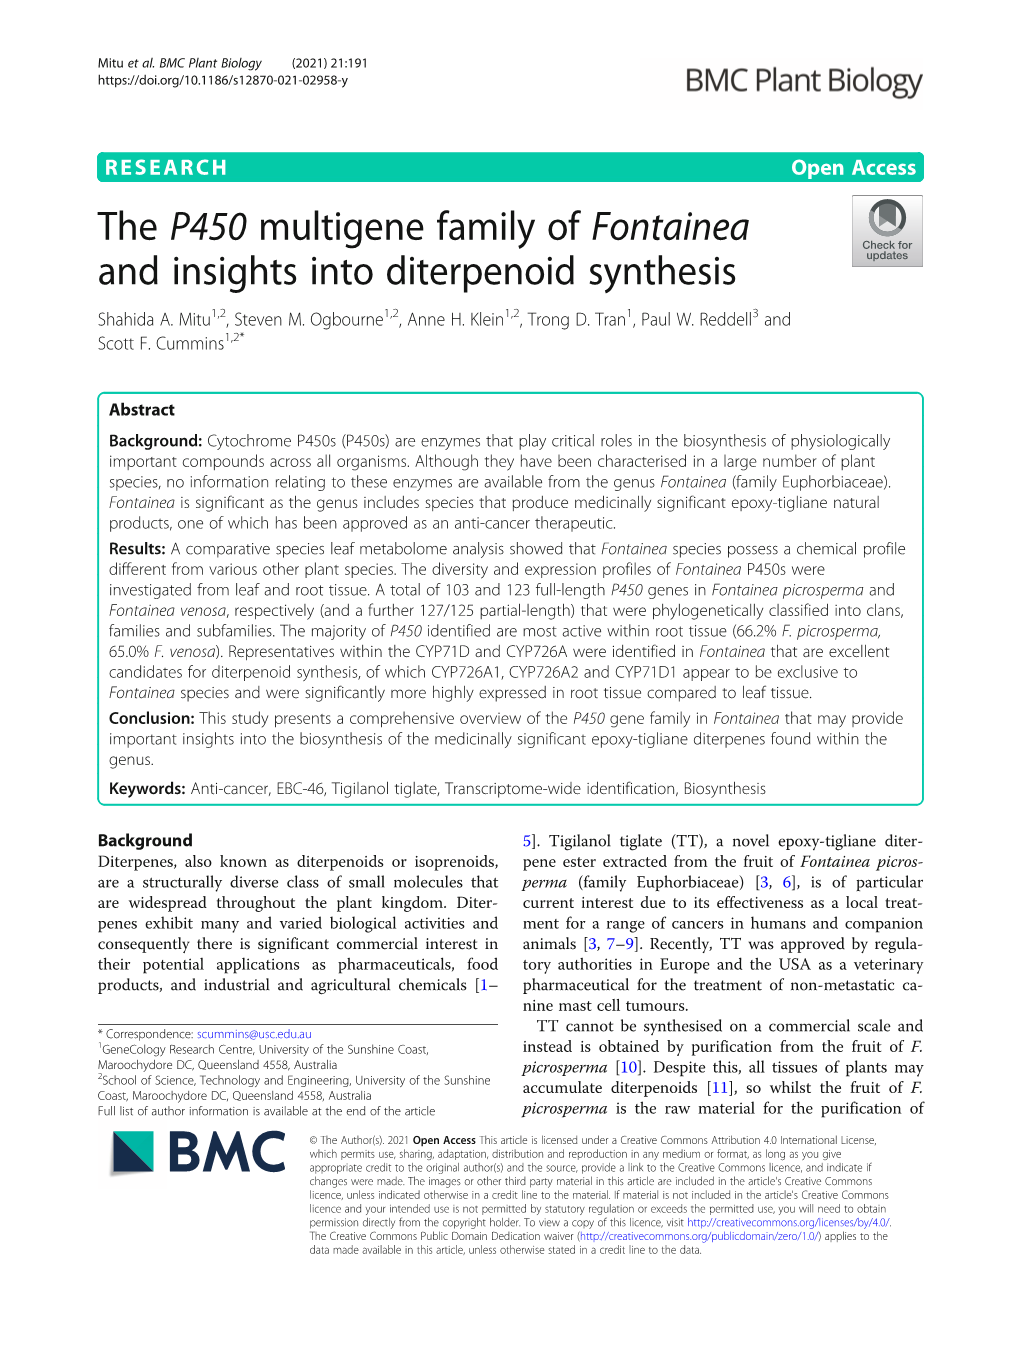 The P450 Multigene Family of Fontainea and Insights Into Diterpenoid Synthesis Shahida A